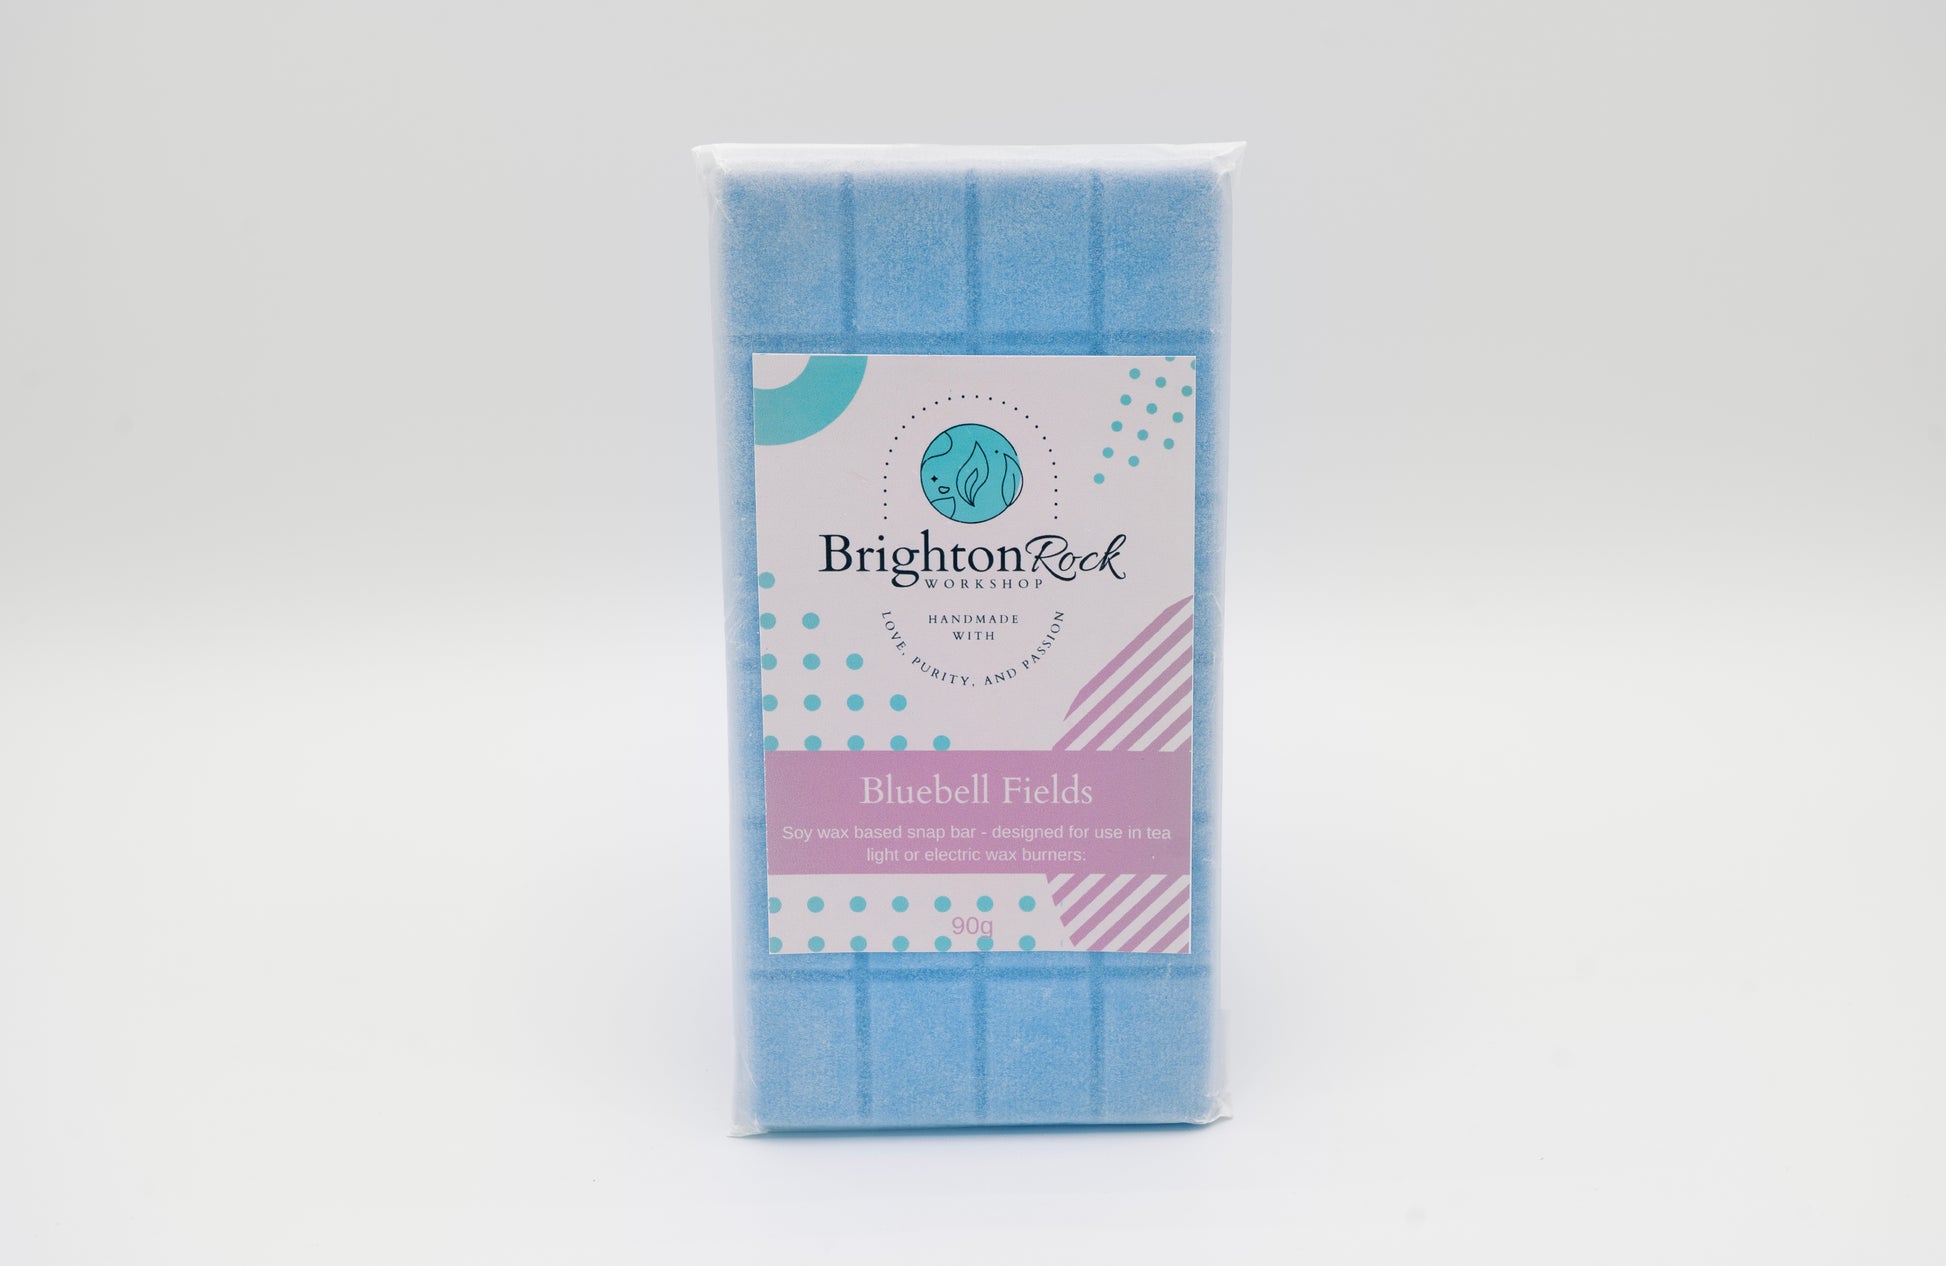 bluebell fields 30g or 90g strongly scented wax melt snap bars. Eco friendly waxed paper packaging. Brighton Rock Workshop wax melts made in Spain and the United Kingdom, available in two sizes. Suitable for tea light or electric burners